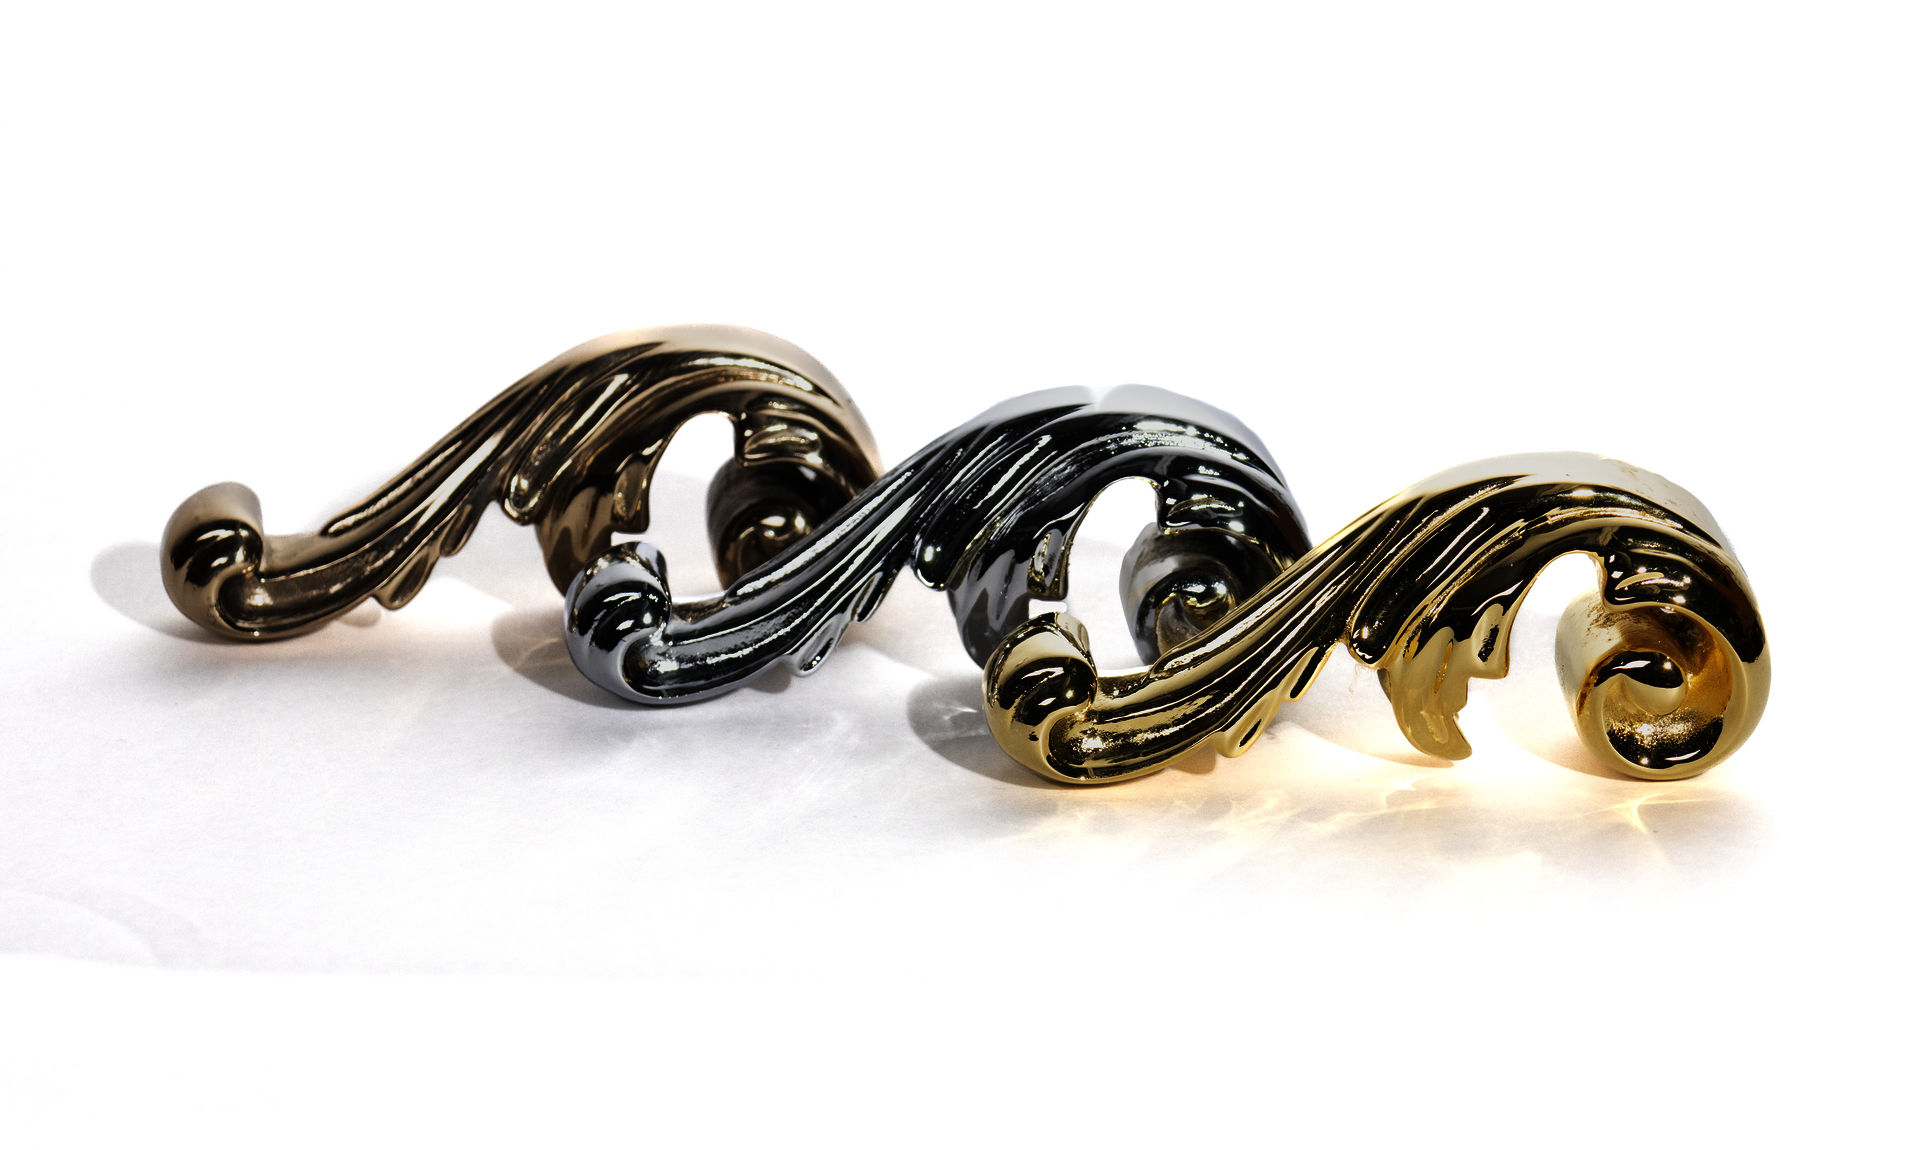 solid cast bronze acanthus leaf ornaments. Three are viewed from the side in line with eachother, one is polished bronze, one is gold-plated, one is chrome-plated